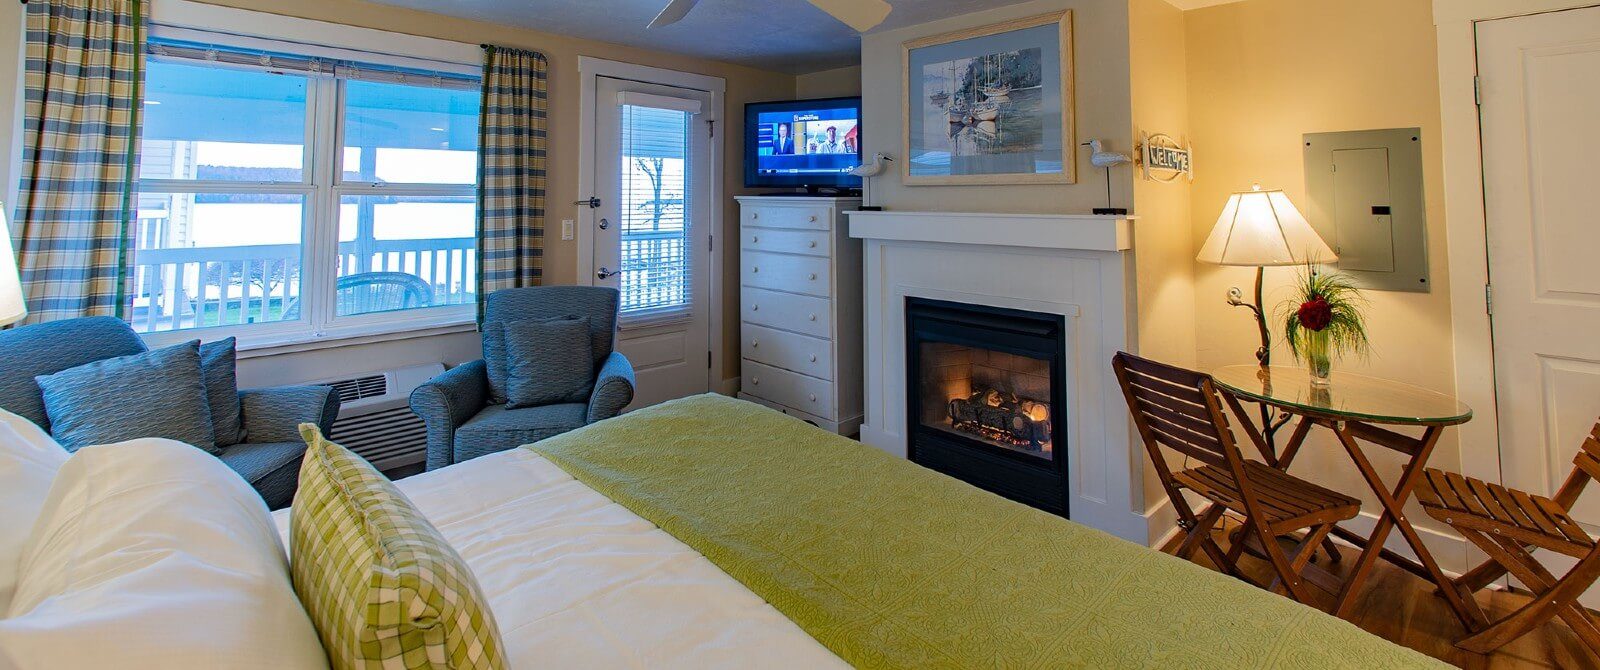 Bedroom with king bed, sitting chairs by large window, tall dresser with TV and gas fireplace